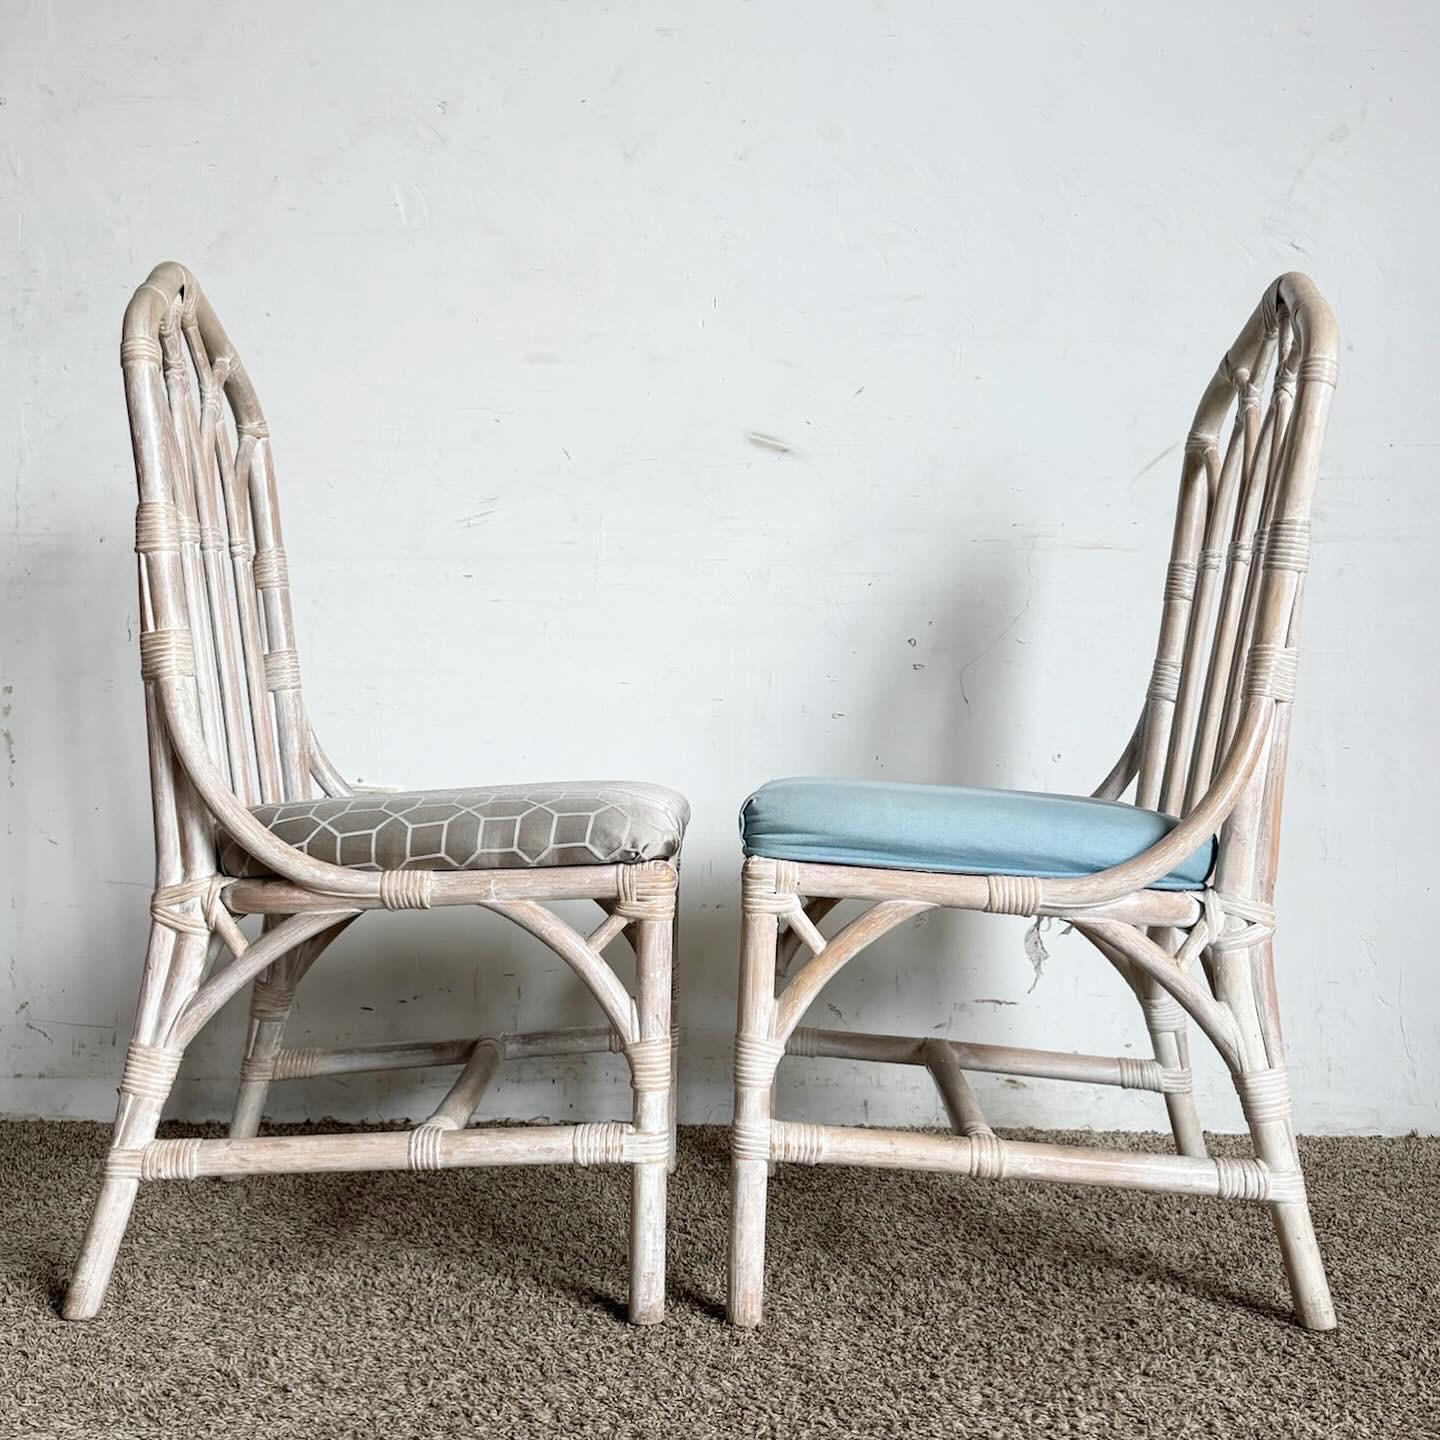 The Boho Chic Bamboo Rattan Dining Chairs by Henry Link are a perfect addition to any dining area. Crafted with high-quality bamboo and rattan, they feature intricate weaving and craftsmanship, embodying bohemian elegance. These chairs, designed by